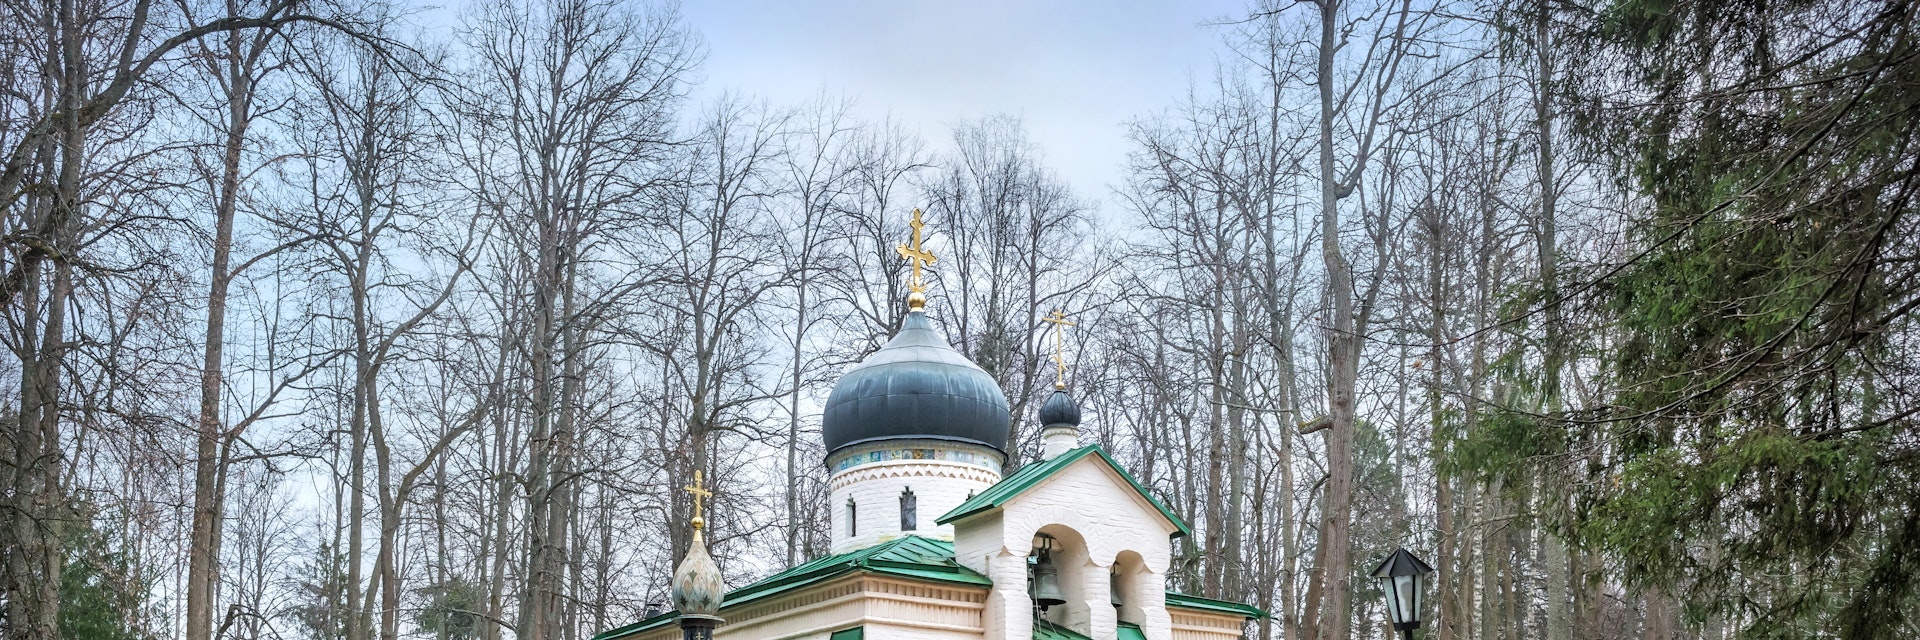 Church of the Savior Not Made by Hands in Abramtsevo.